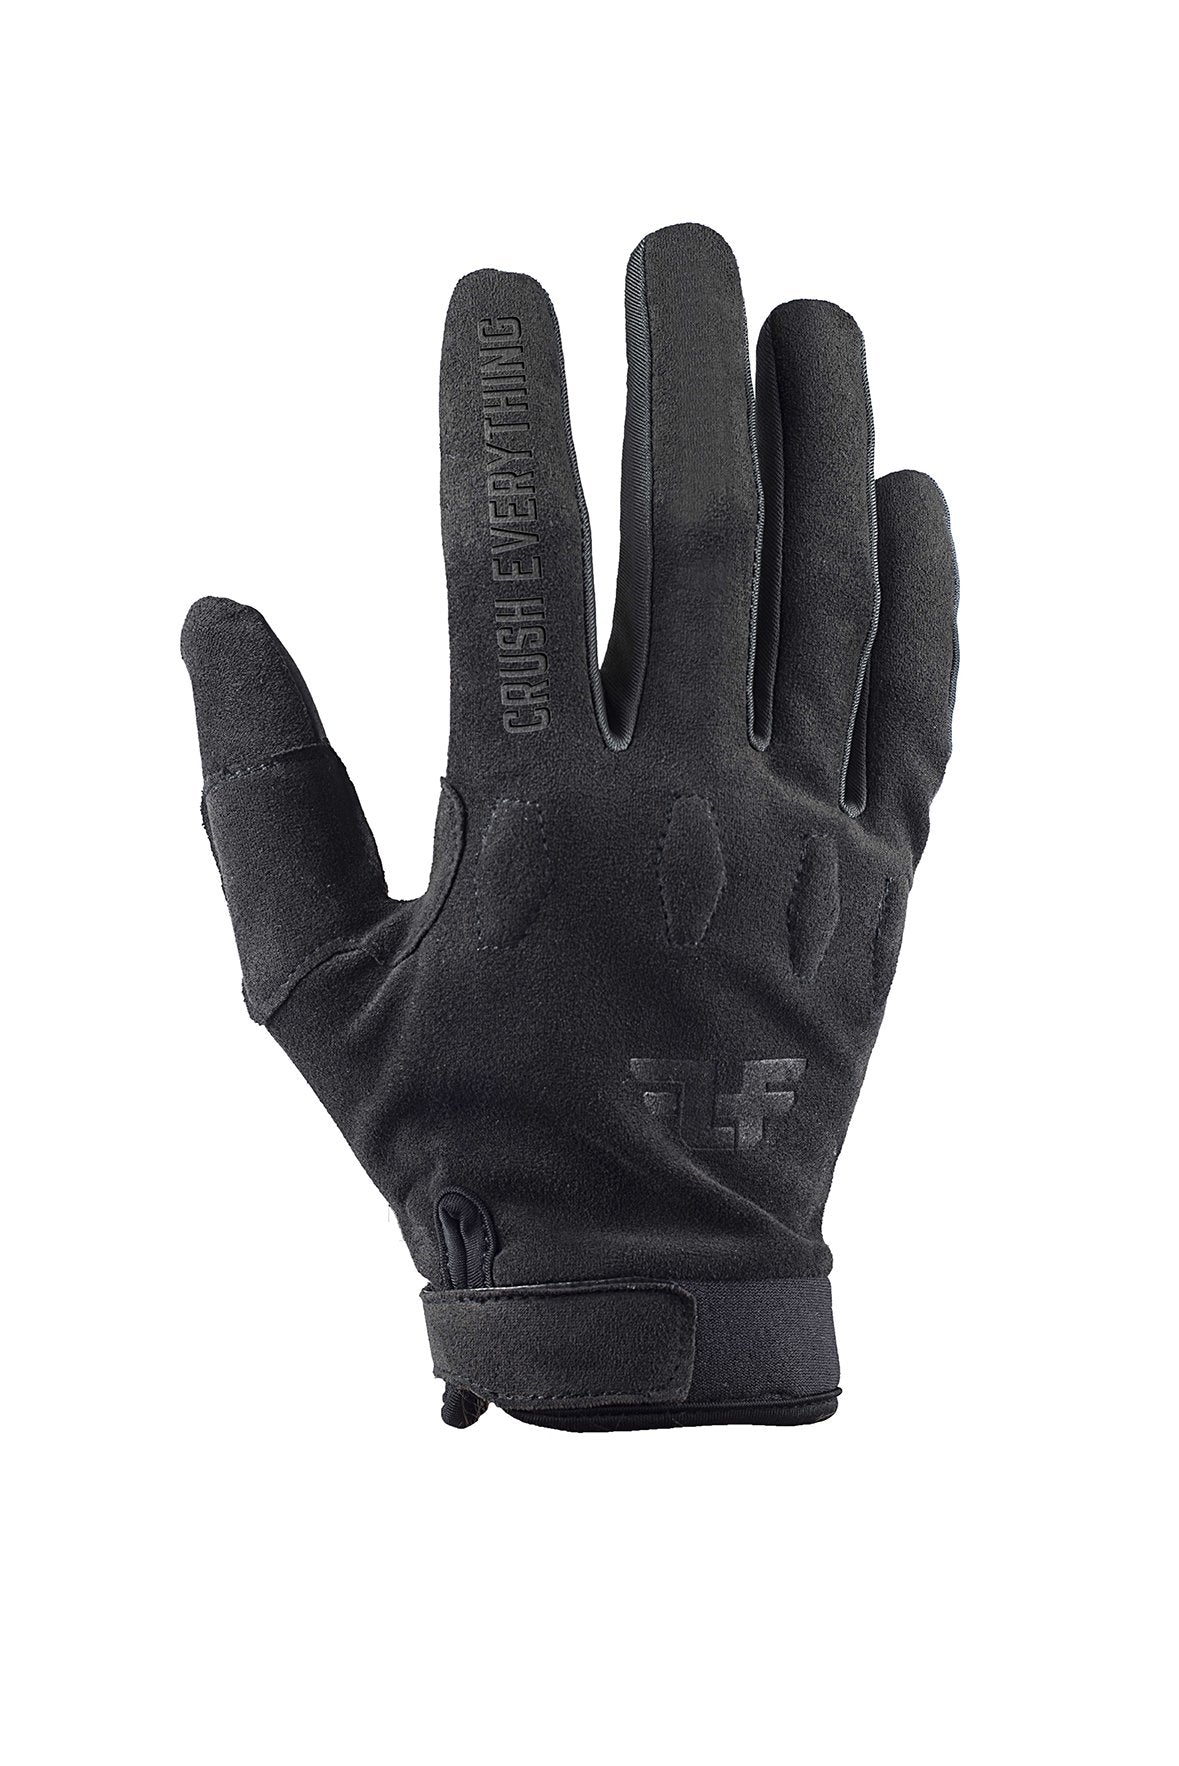 Line of Fire Gauntlet Precision Touch Screen Gloves